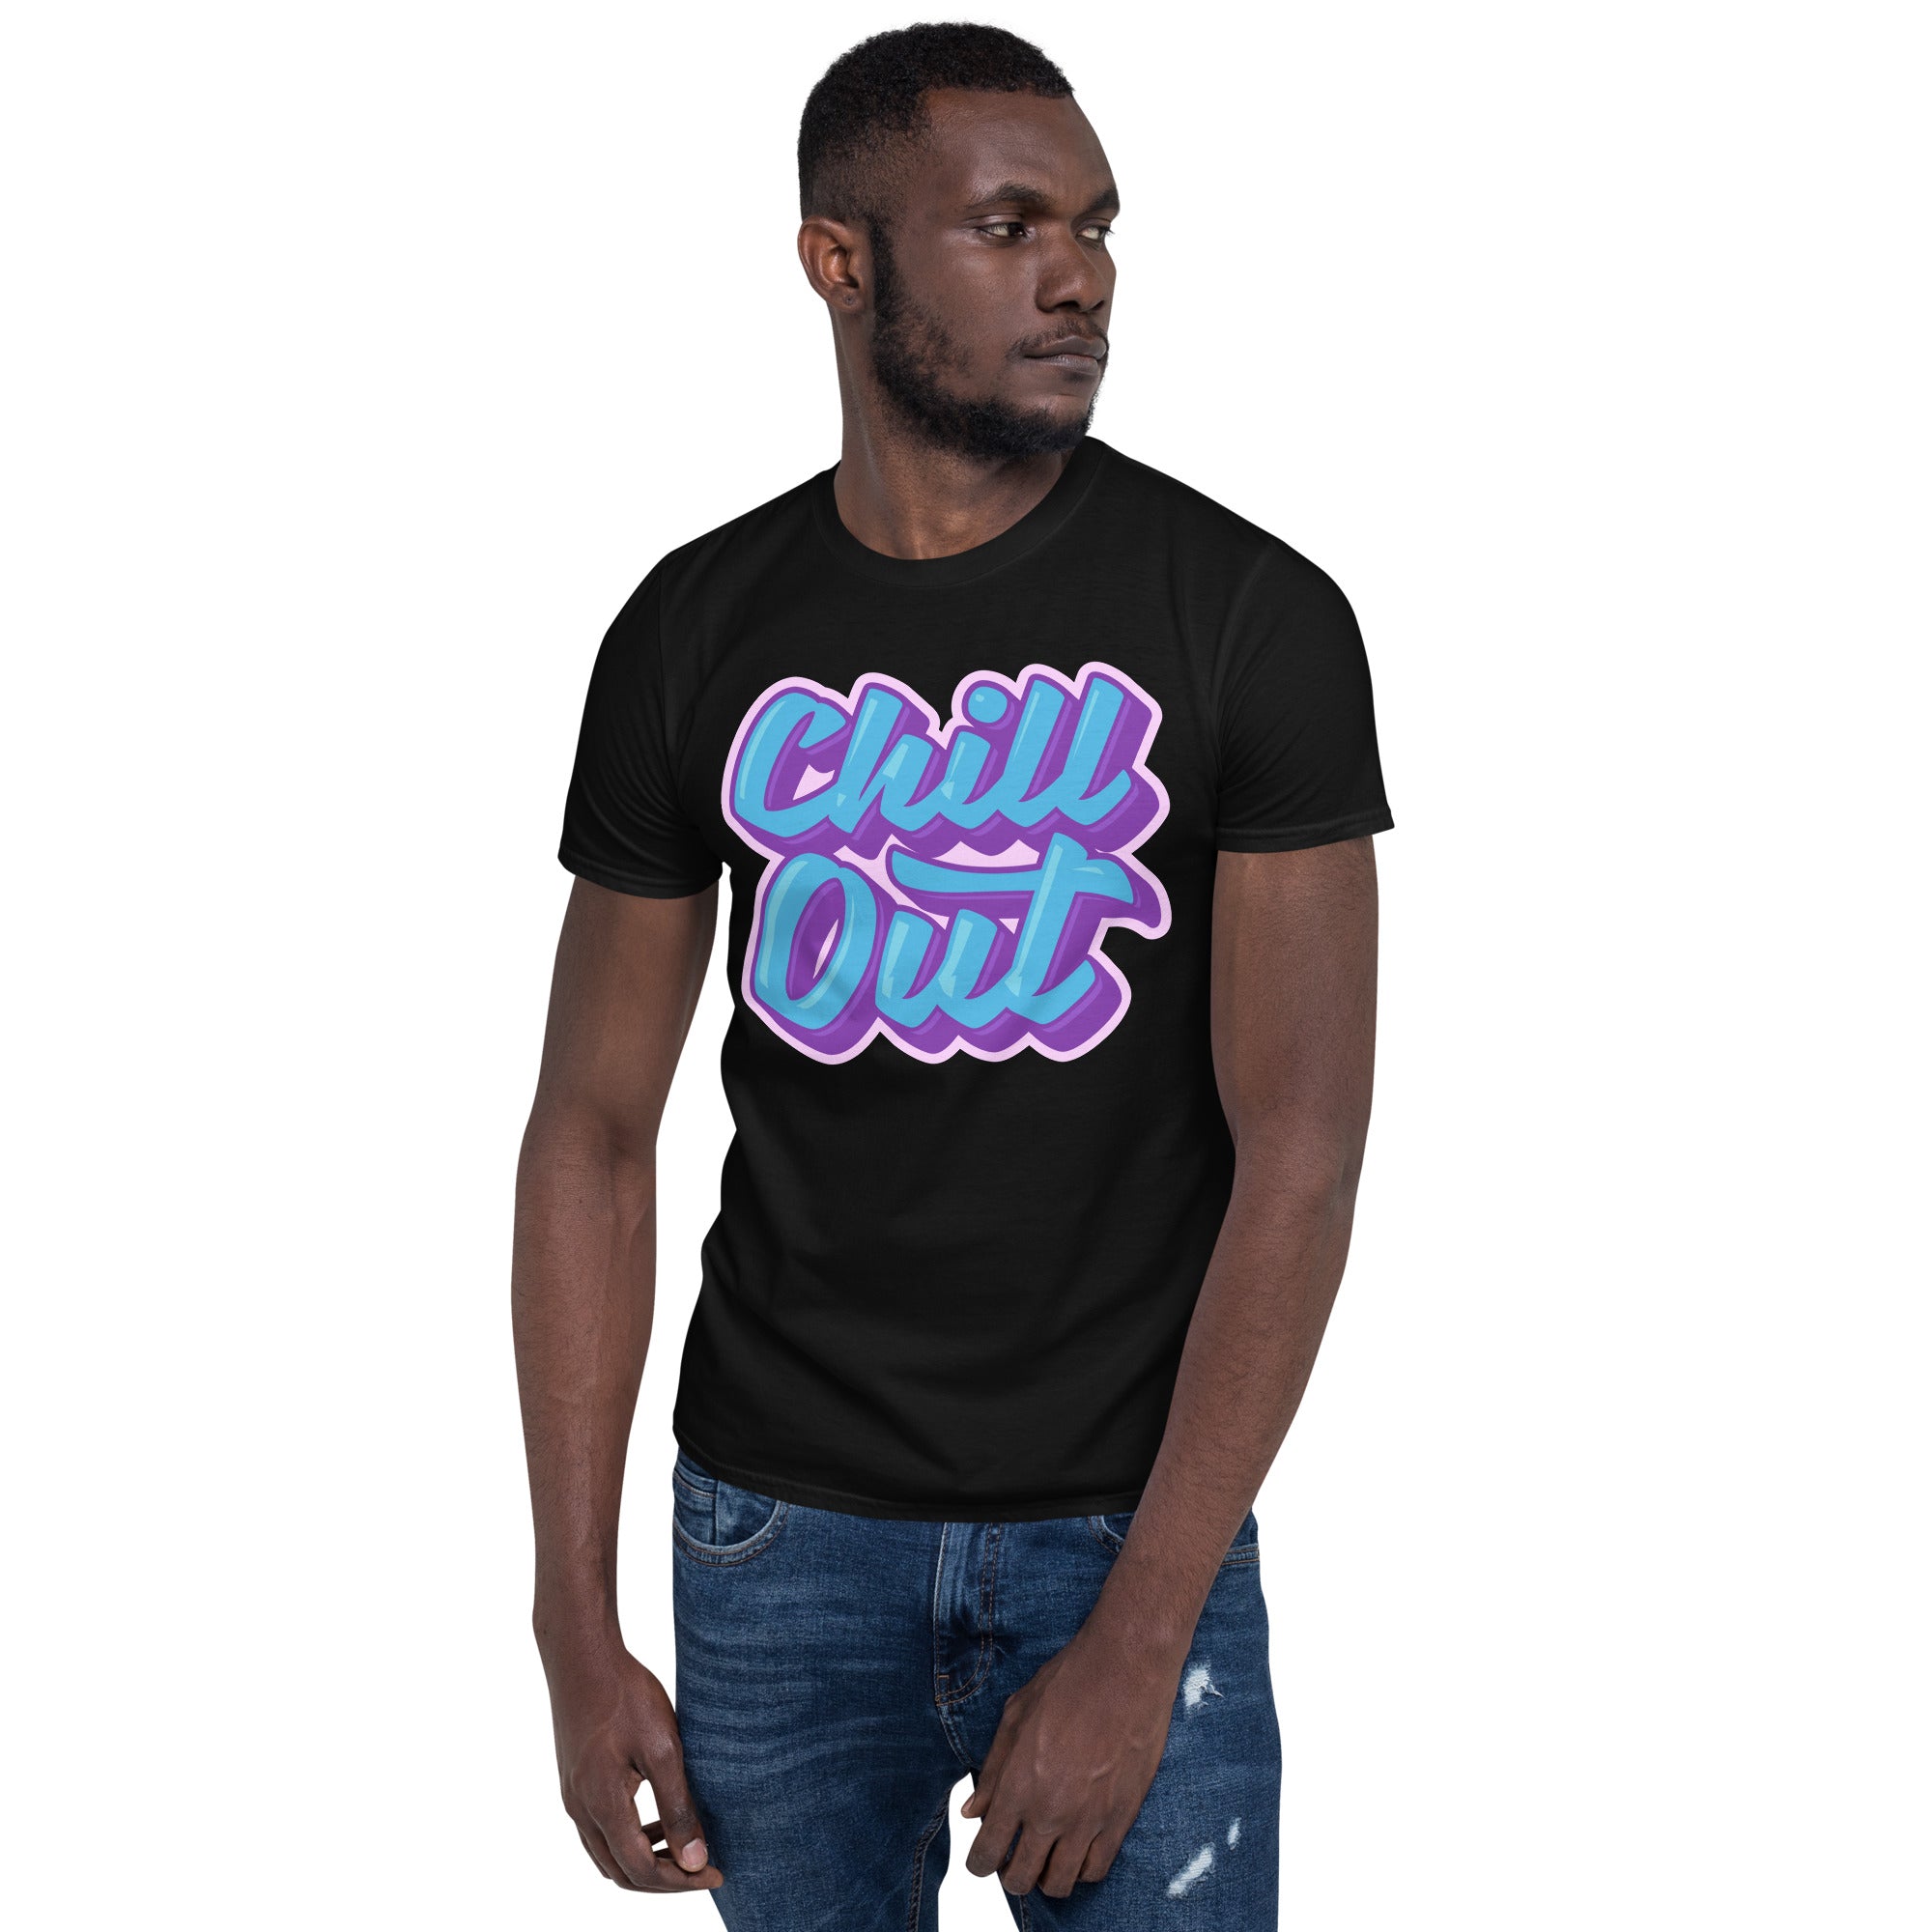 Chill Out - Short-Sleeve Unisex T-Shirt